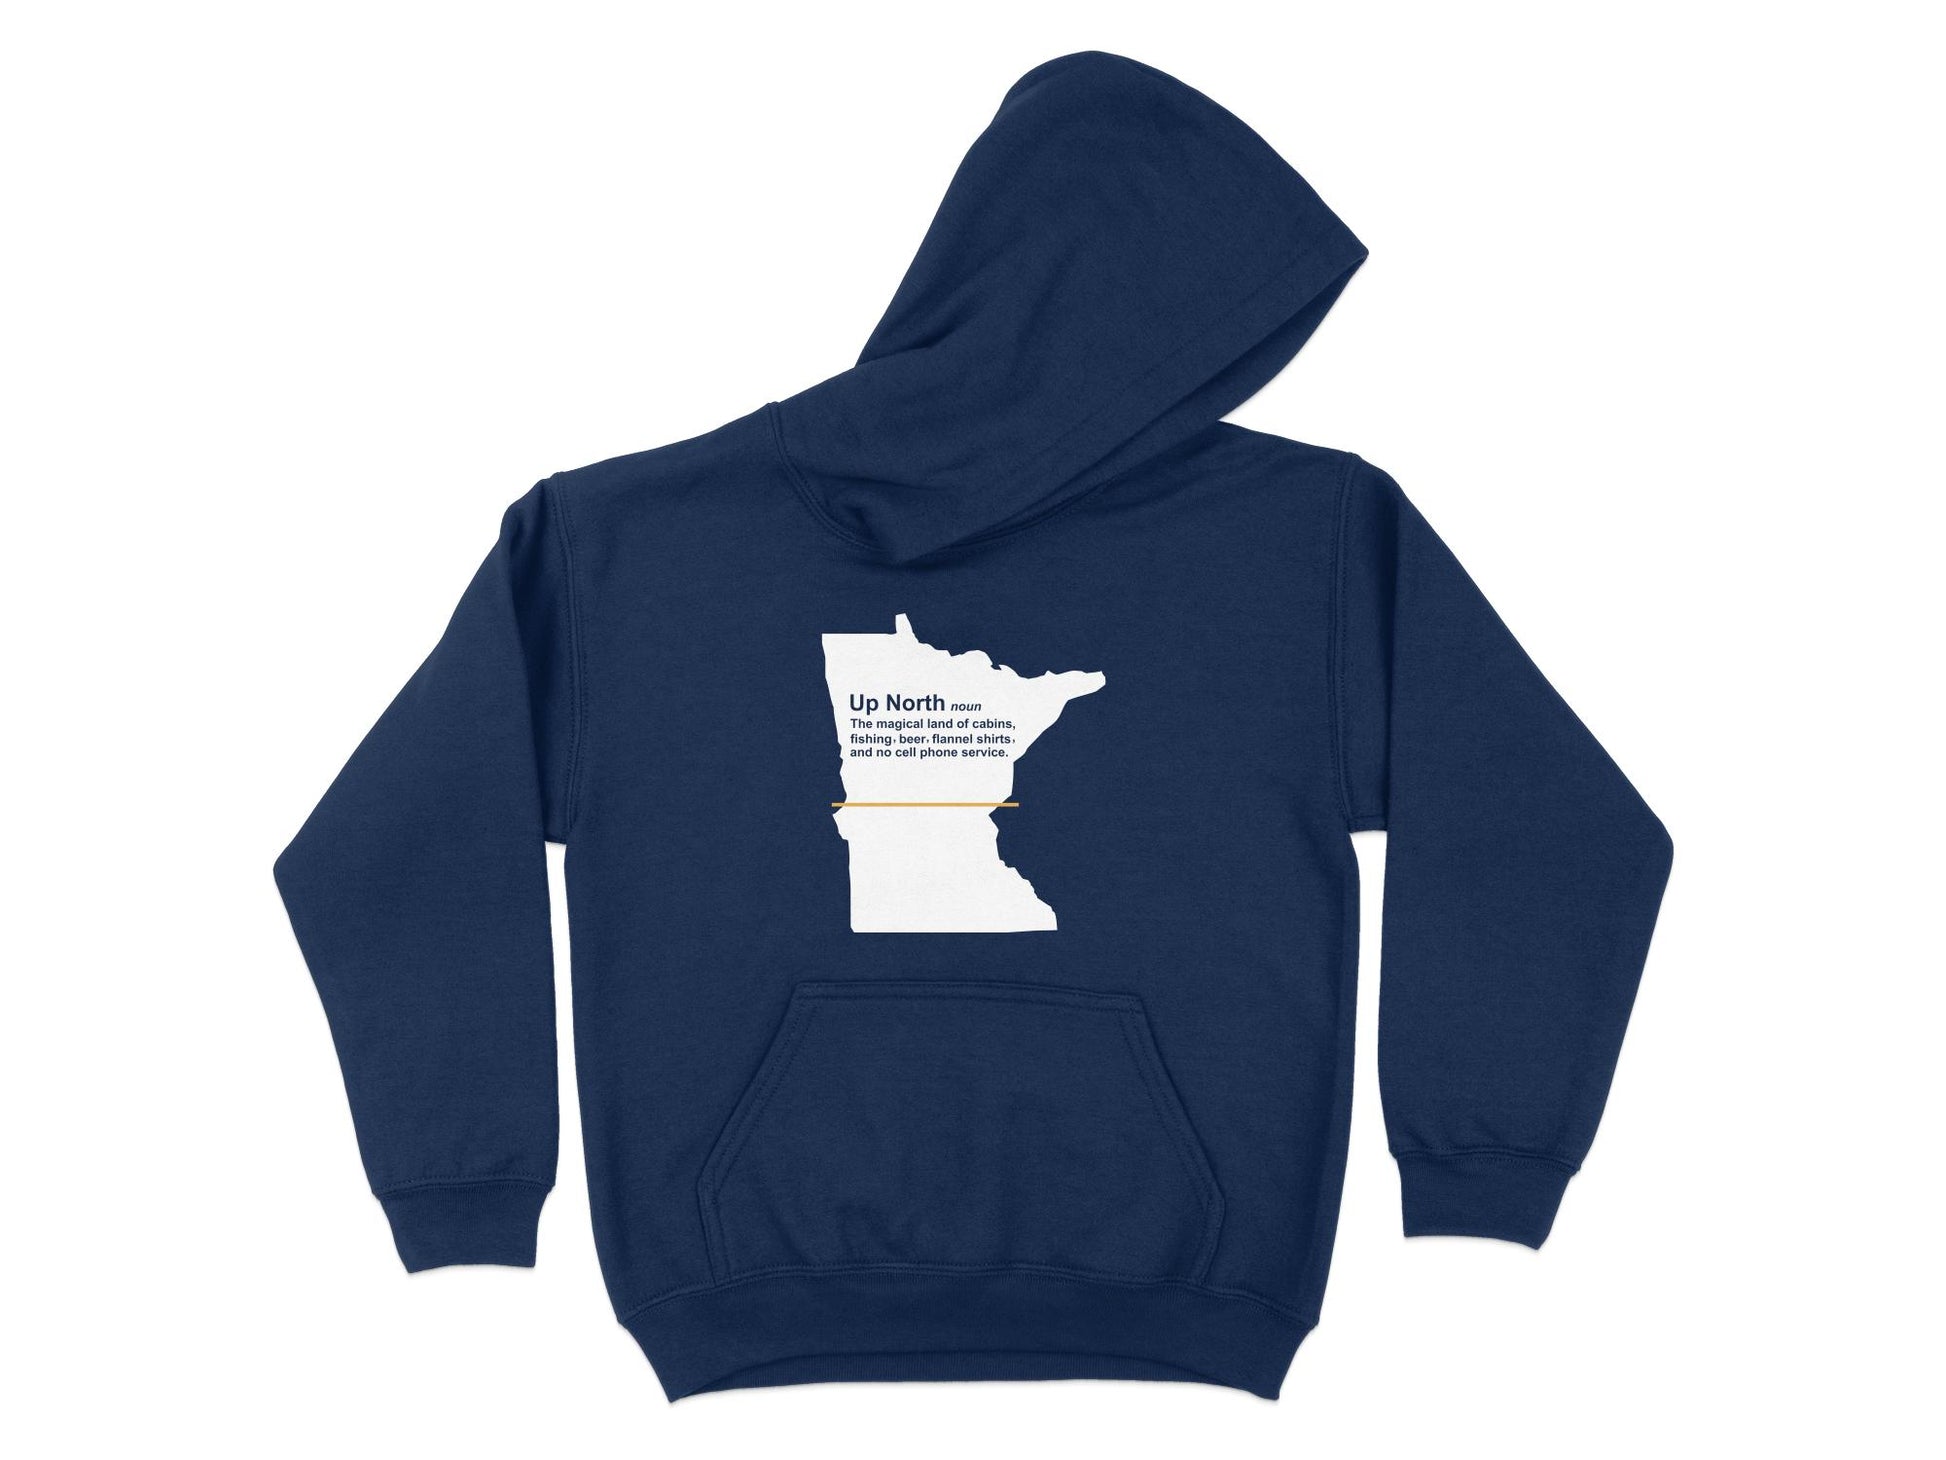 Minnesota T Hoodie - Up North Definition, navy blue